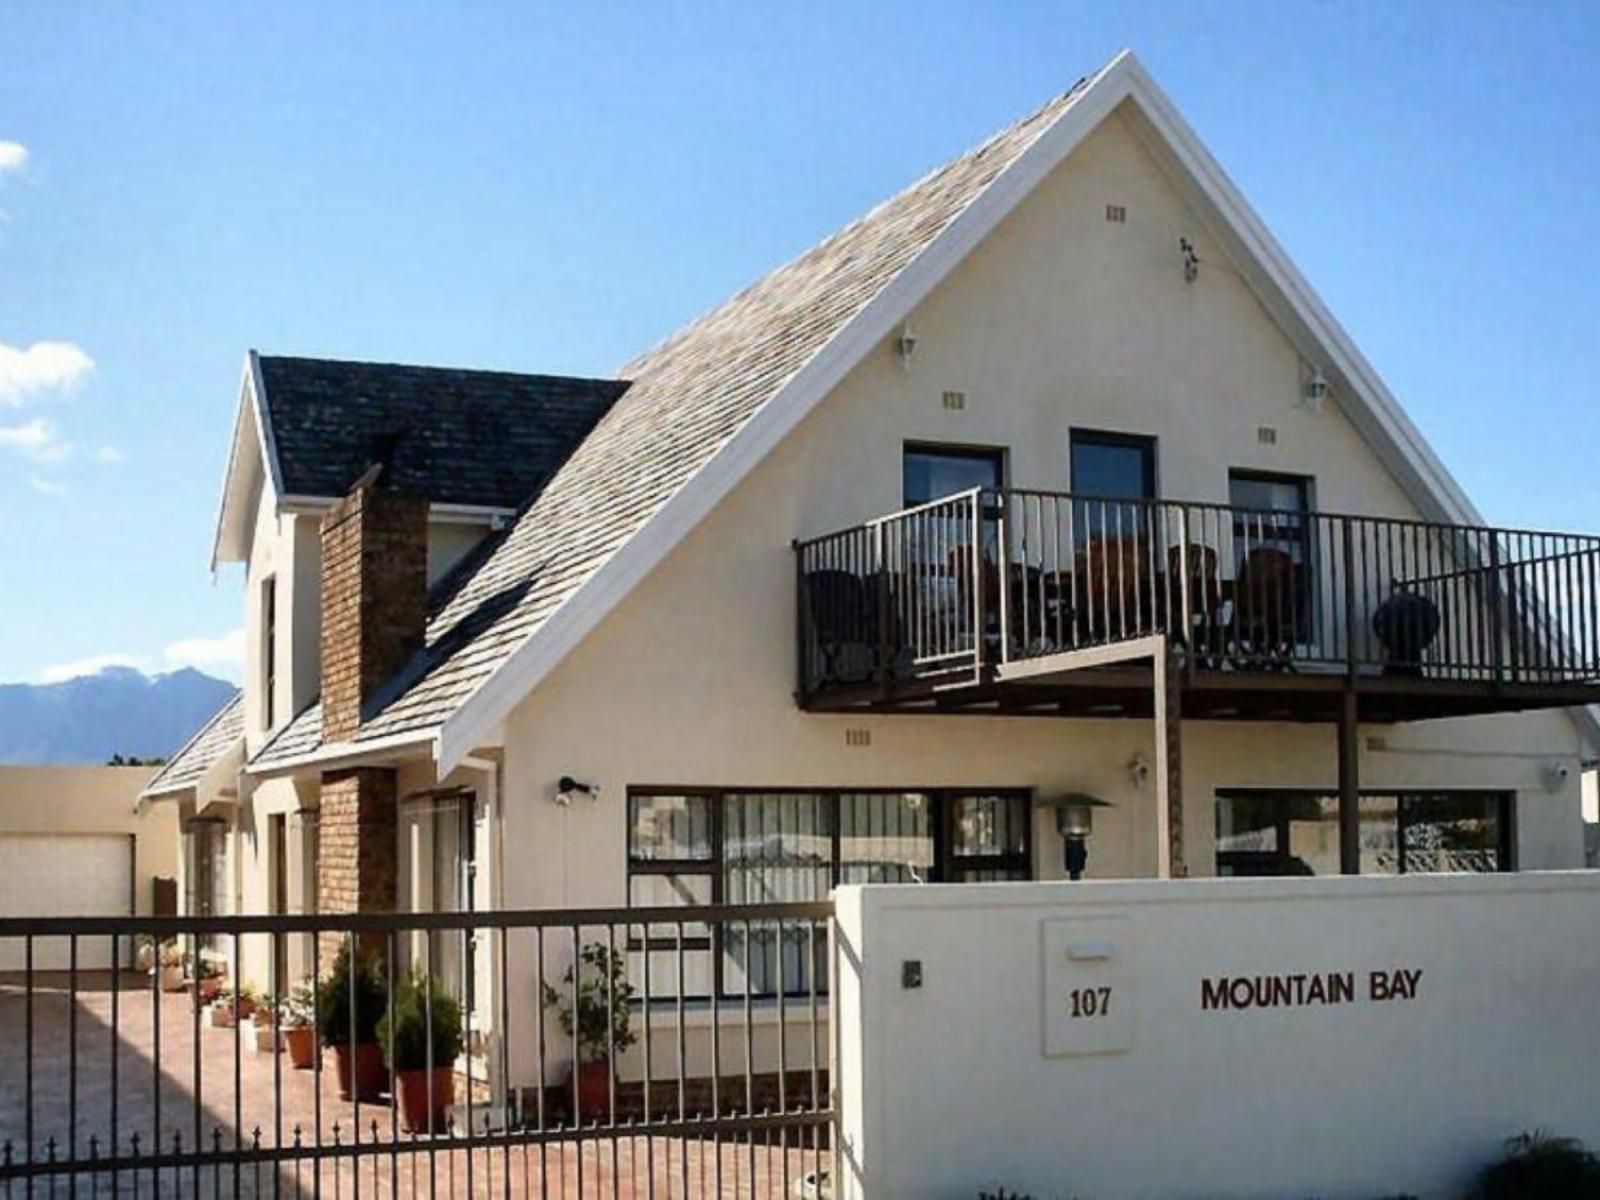 Harbour Island Gordons Bay Gordons Bay Western Cape South Africa House, Building, Architecture